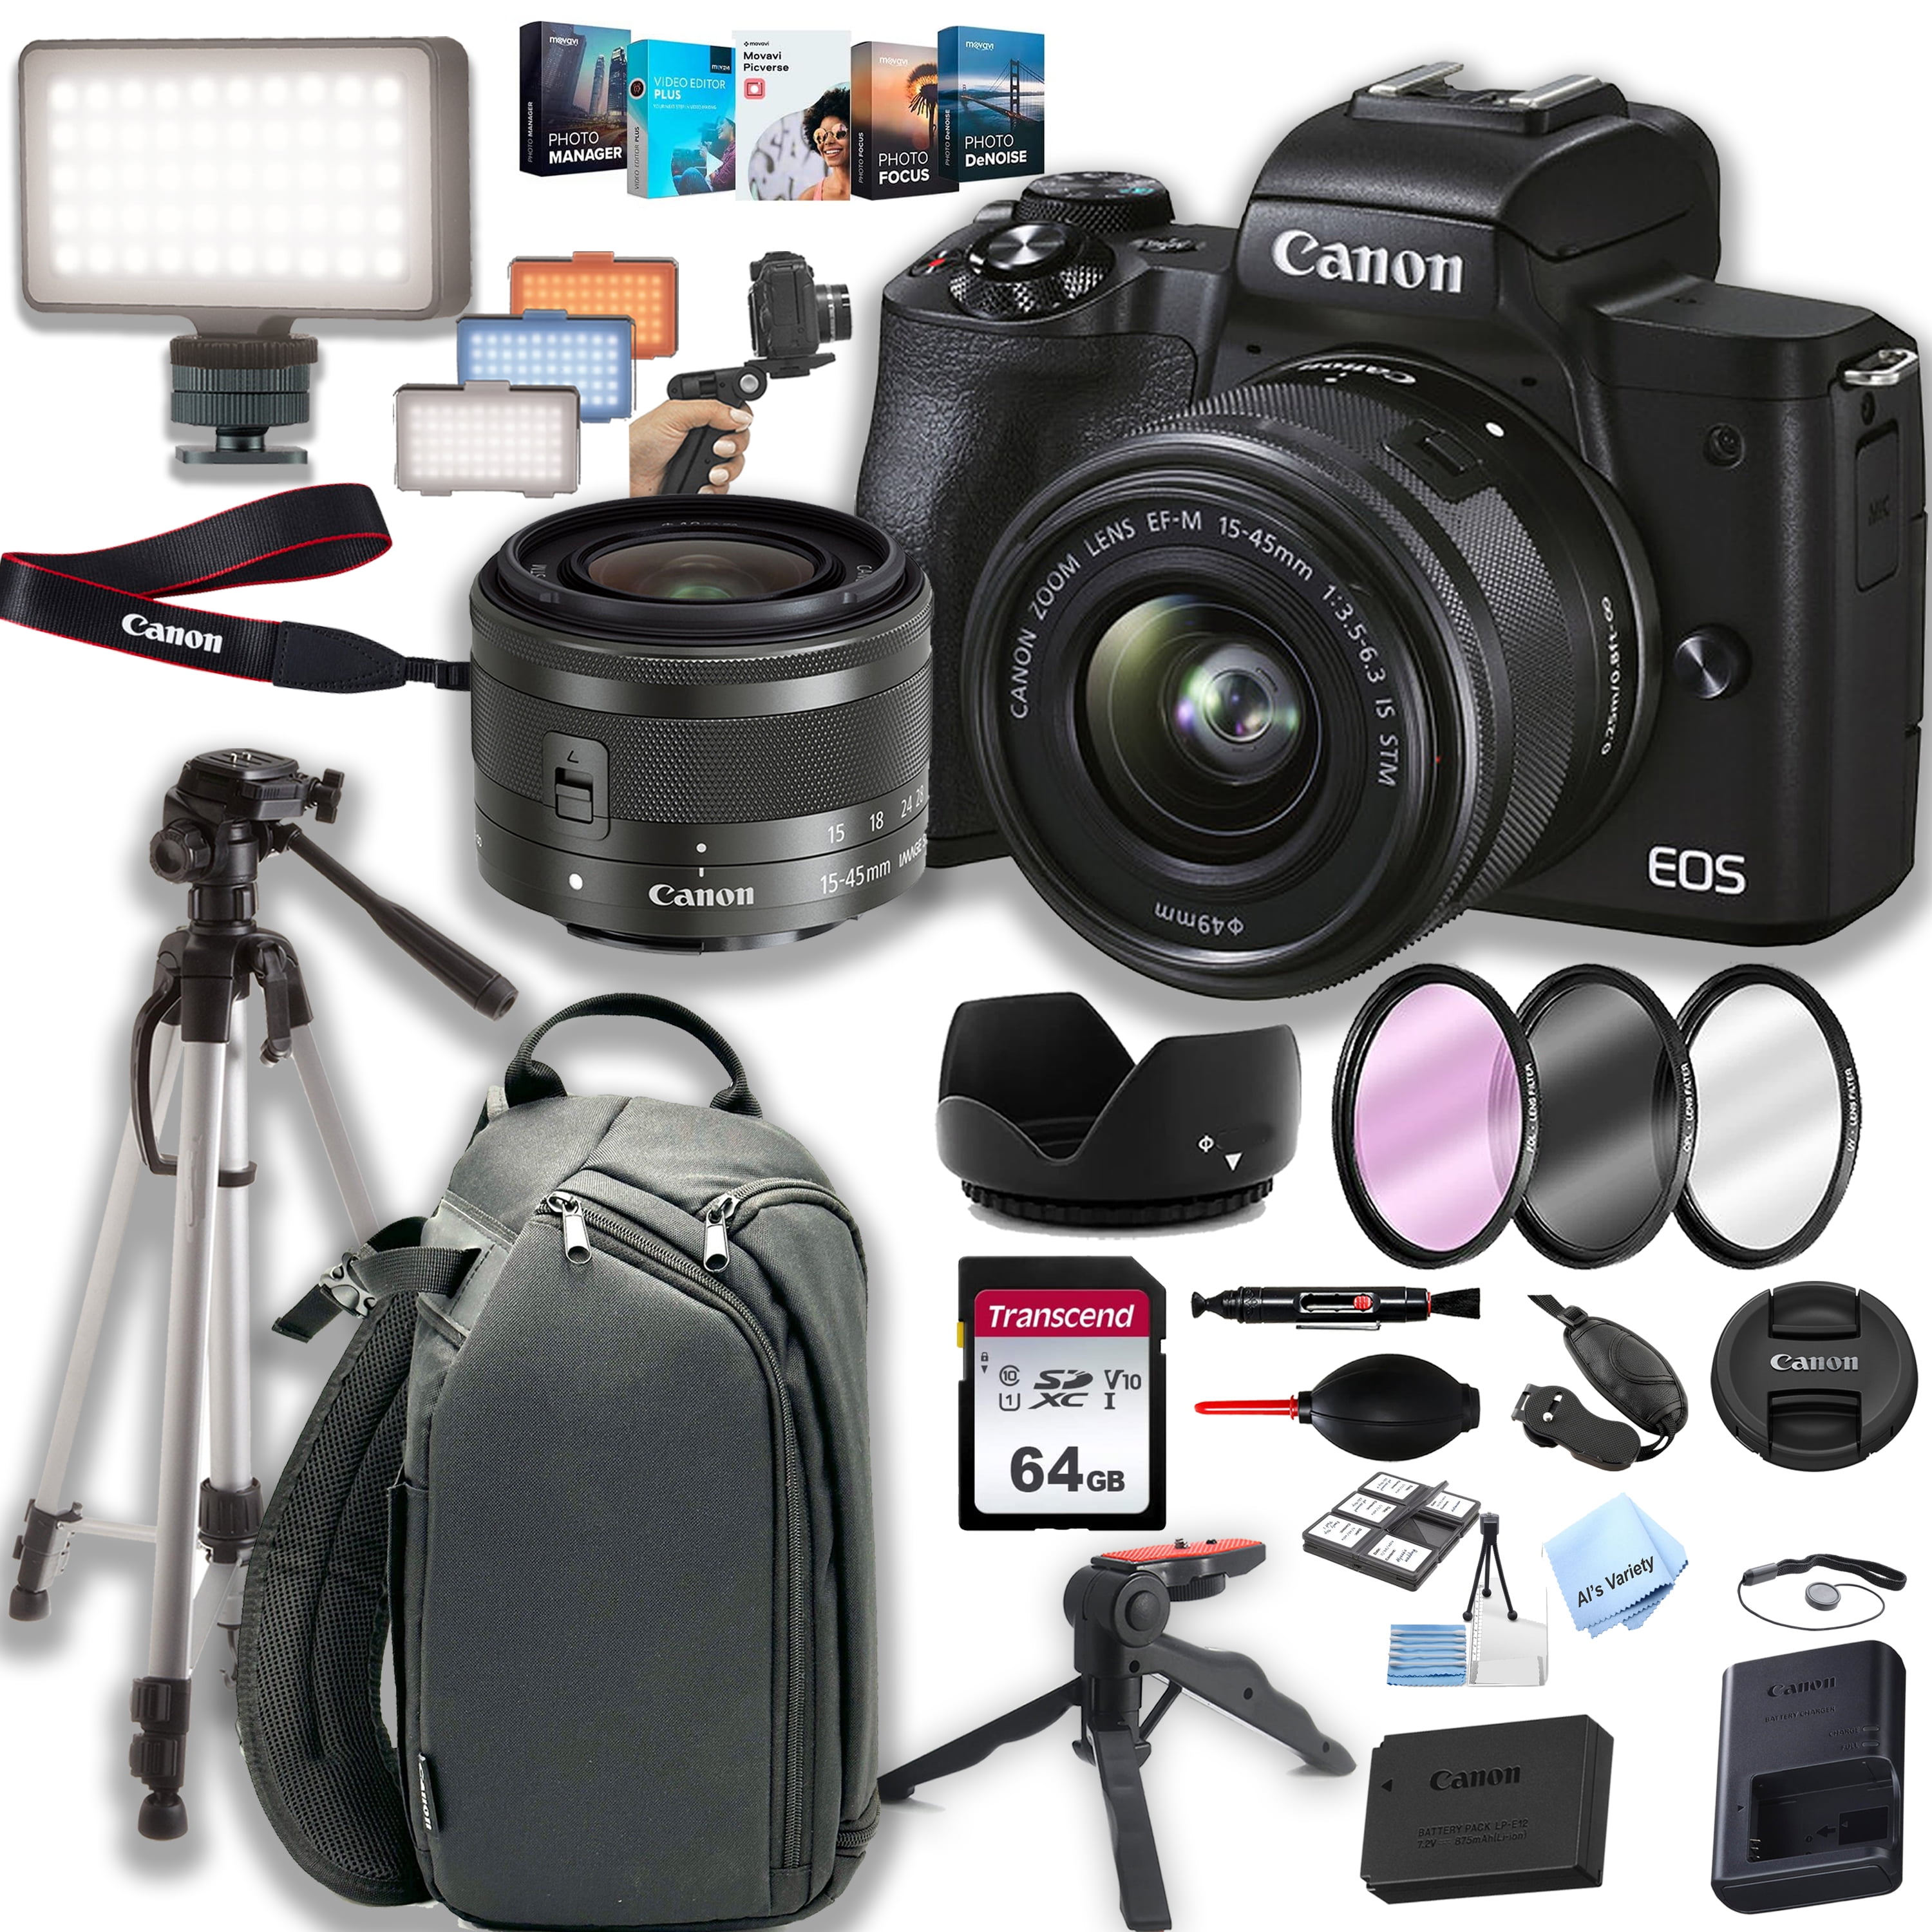  Canon EOS M50 Mark II Mirrorless Camera with 15-45mm and  55-200mm Lenses (Black) (4728C014) + 4K Monitor + Rode VideoMic + 64GB  Memory Card + Color Filter Kit + Filter